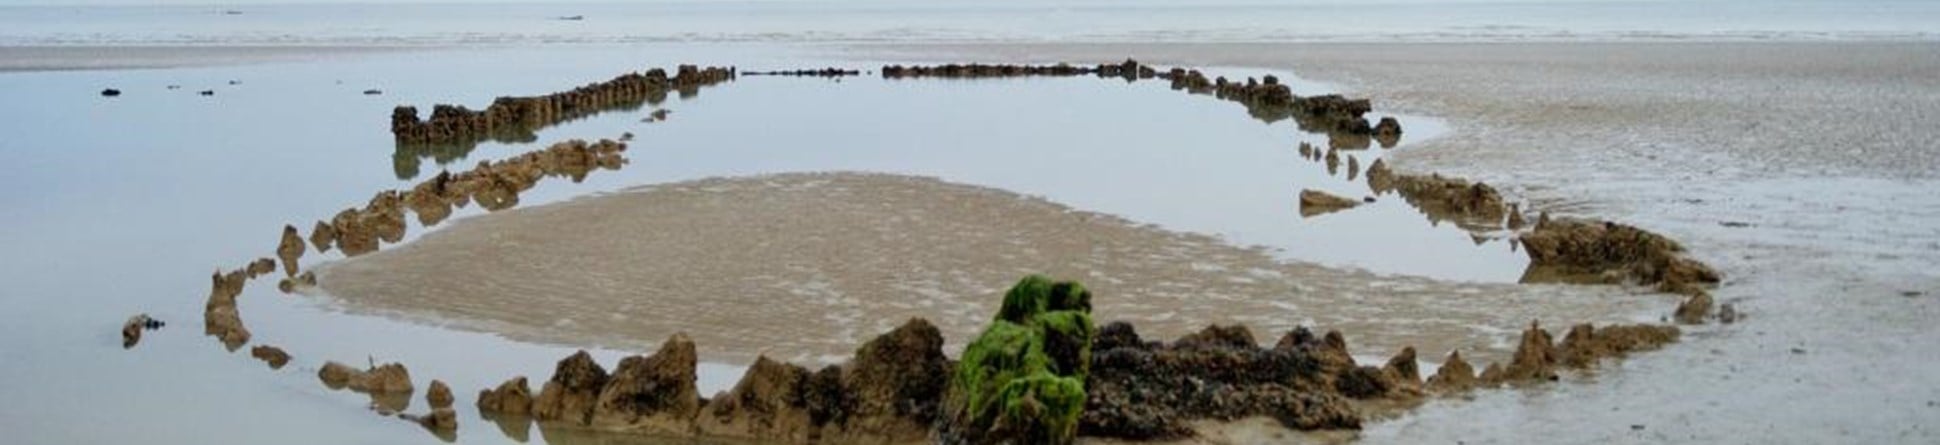 View of the protected wreck of the 'Amsterdam' in shallow water, St Leonards on Sea.